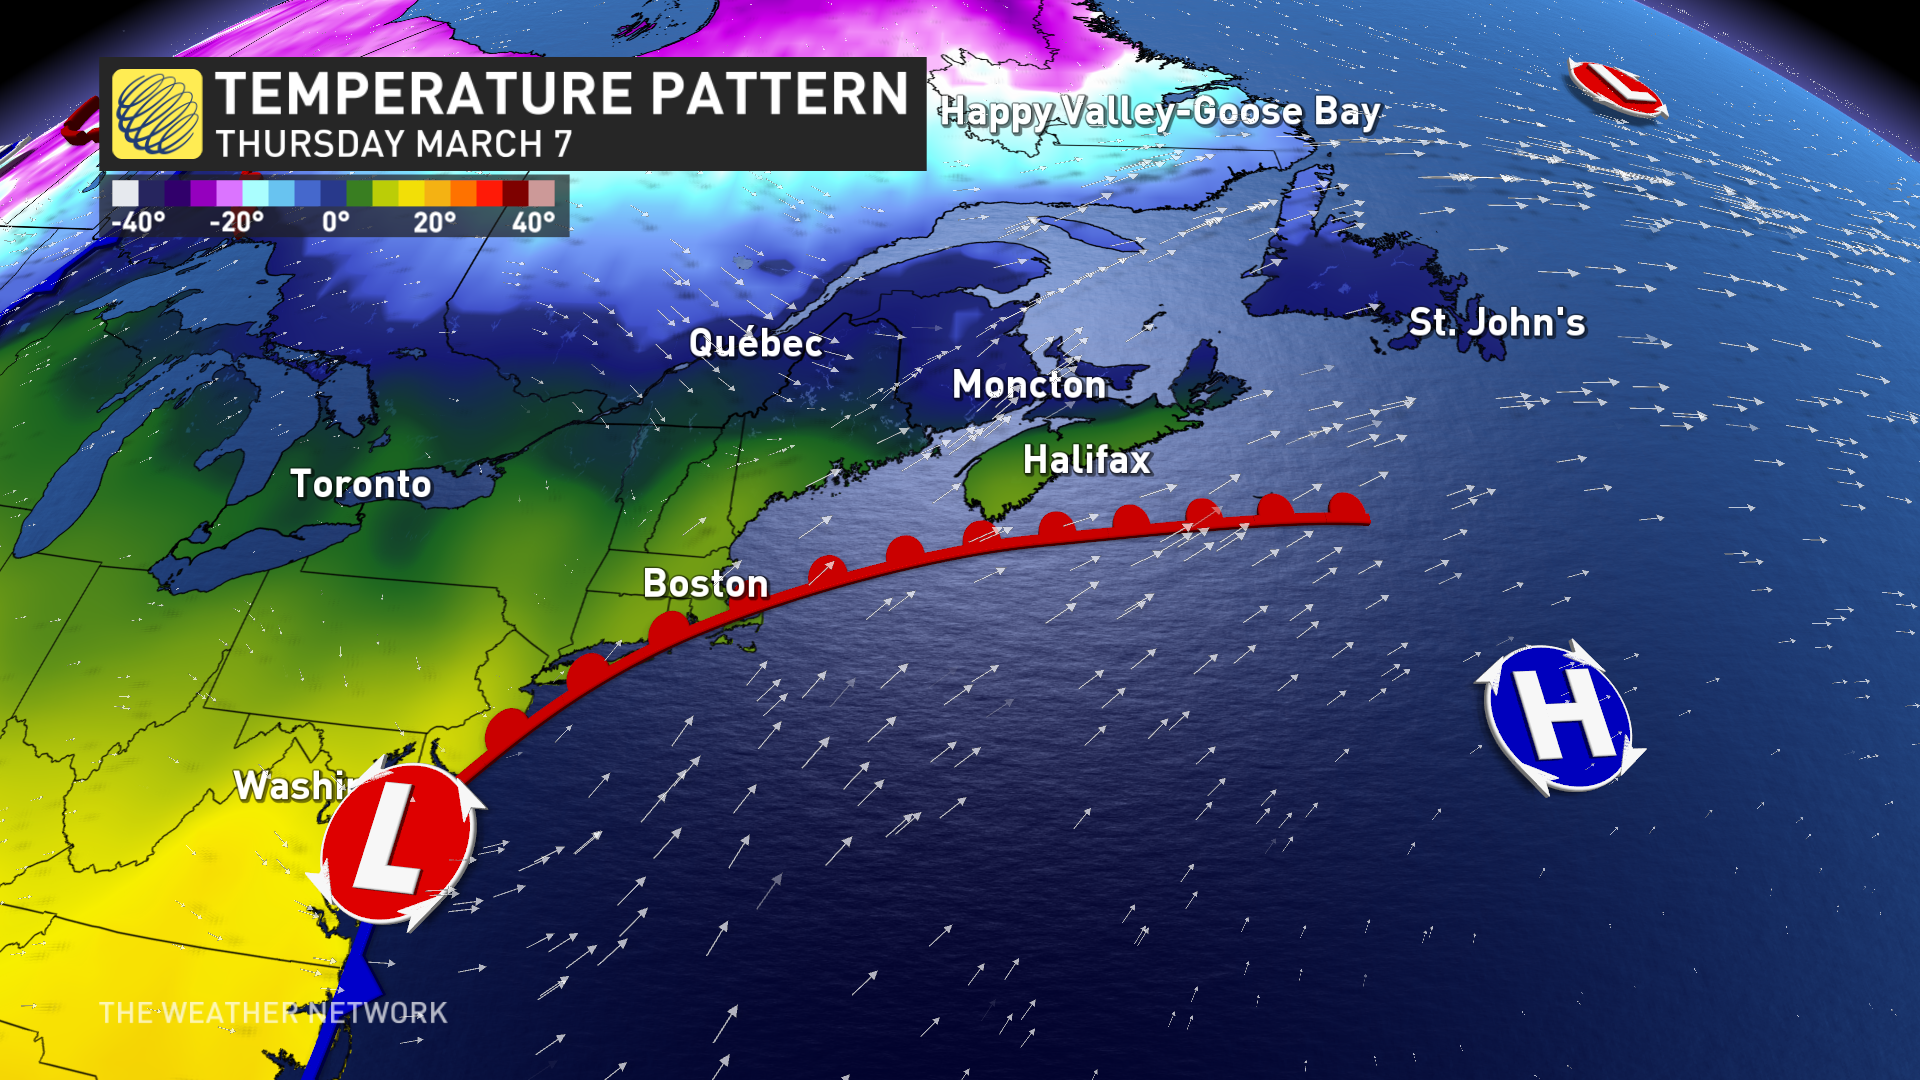 next storm parade over the east coast threatens rain, snow, and an icy mix